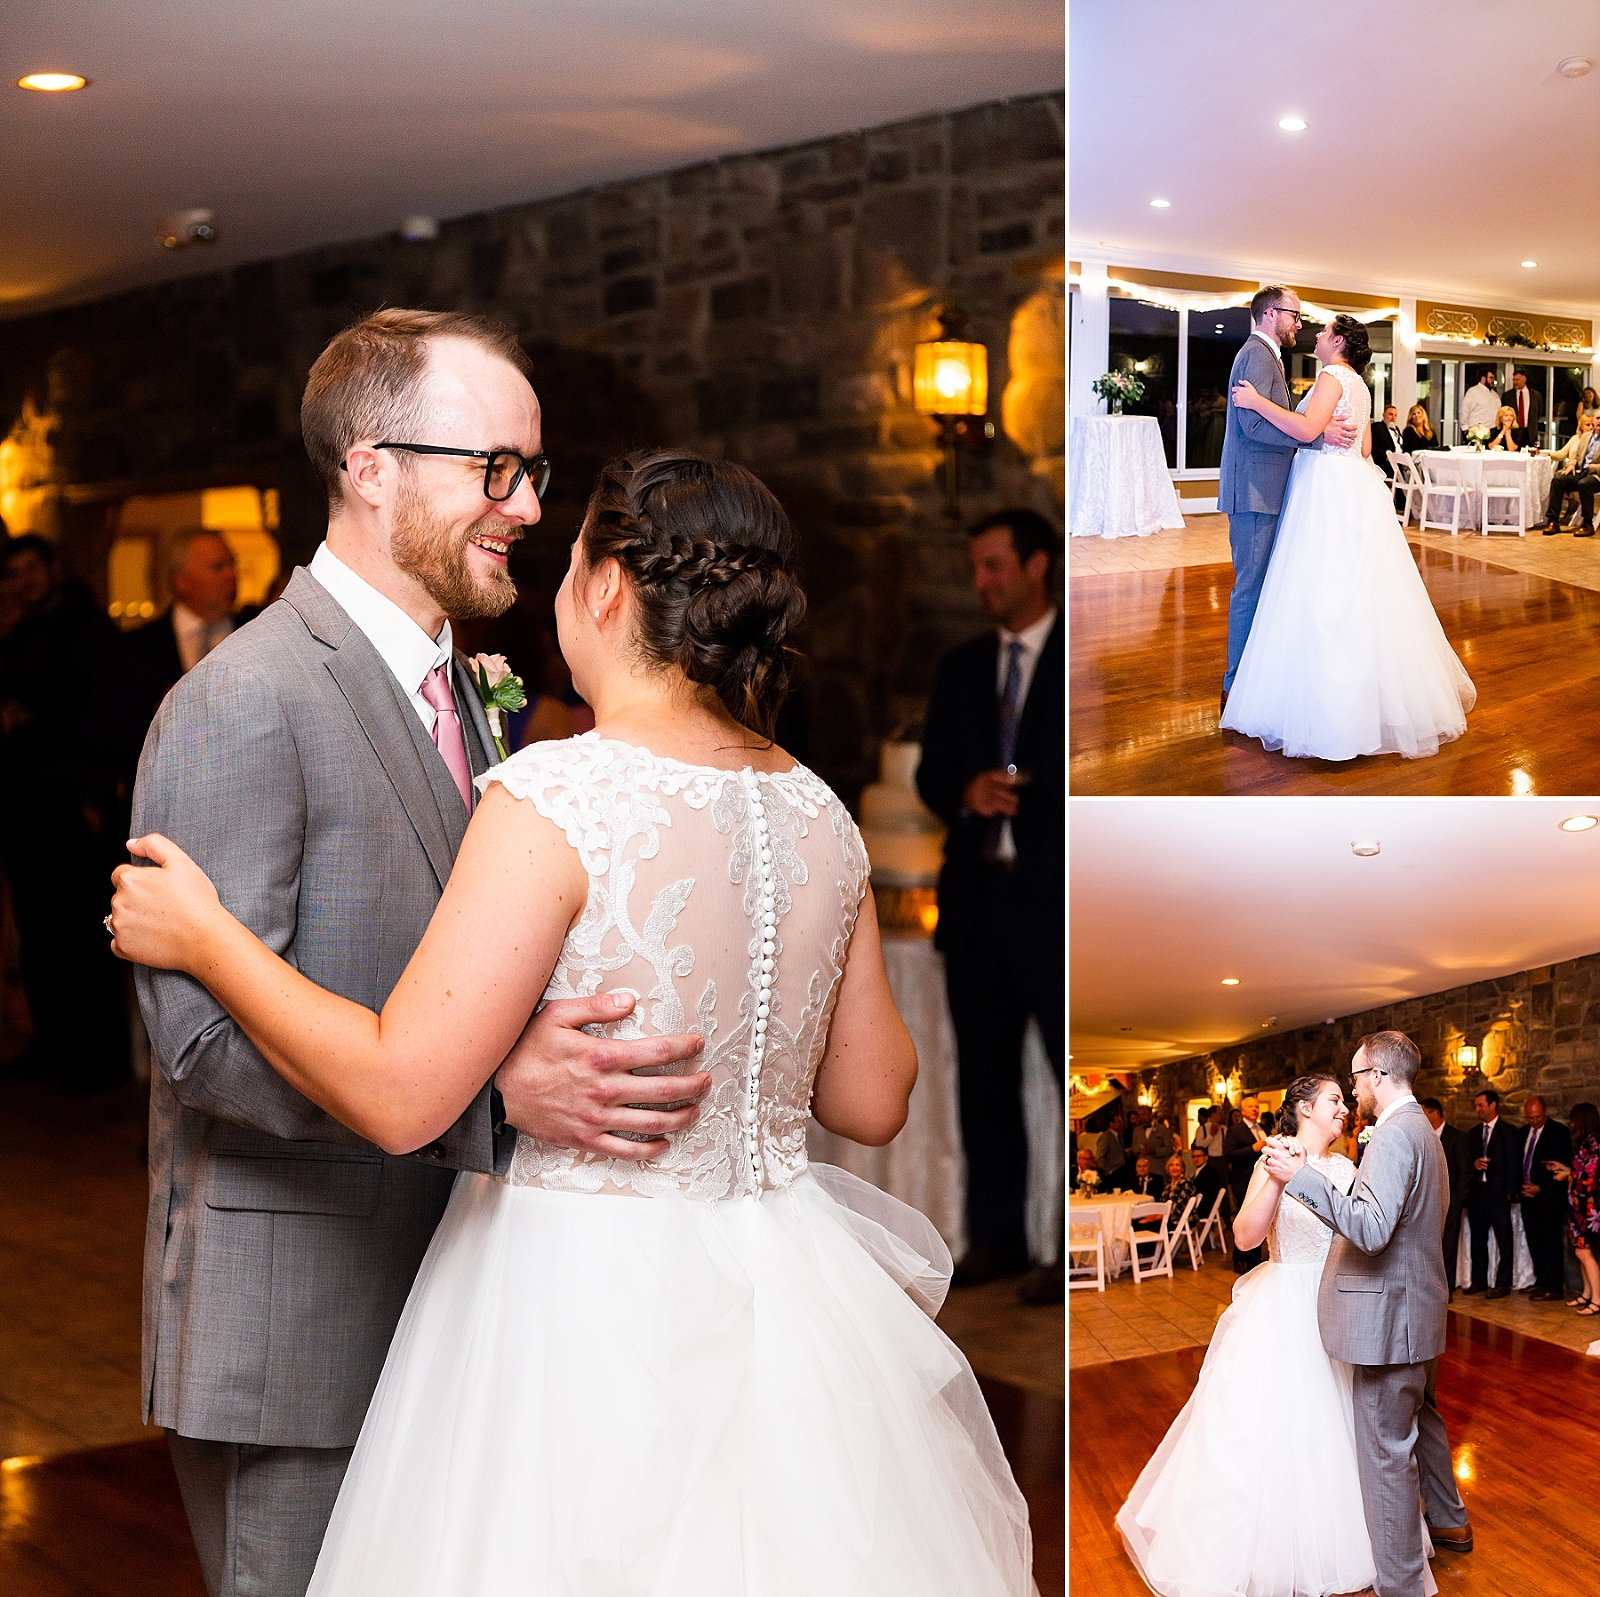 Check out this BEAUTIFUL MARYLAND WEDDING!! This wedding was at Morningside Inn in Frederick, Maryland in June. The rolling hills, beautiful venue, and willow tree were breathtaking. Wedding photos, summer wedding, June wedding, Virginia wedding, wedding photographer. Photographed by Bethanie Vetter Photography LLC. #MorningsideInn #MarylandWedding #VirginiaWedding #SummerWedding #June #WeddingPhotos #WeddingPhotography